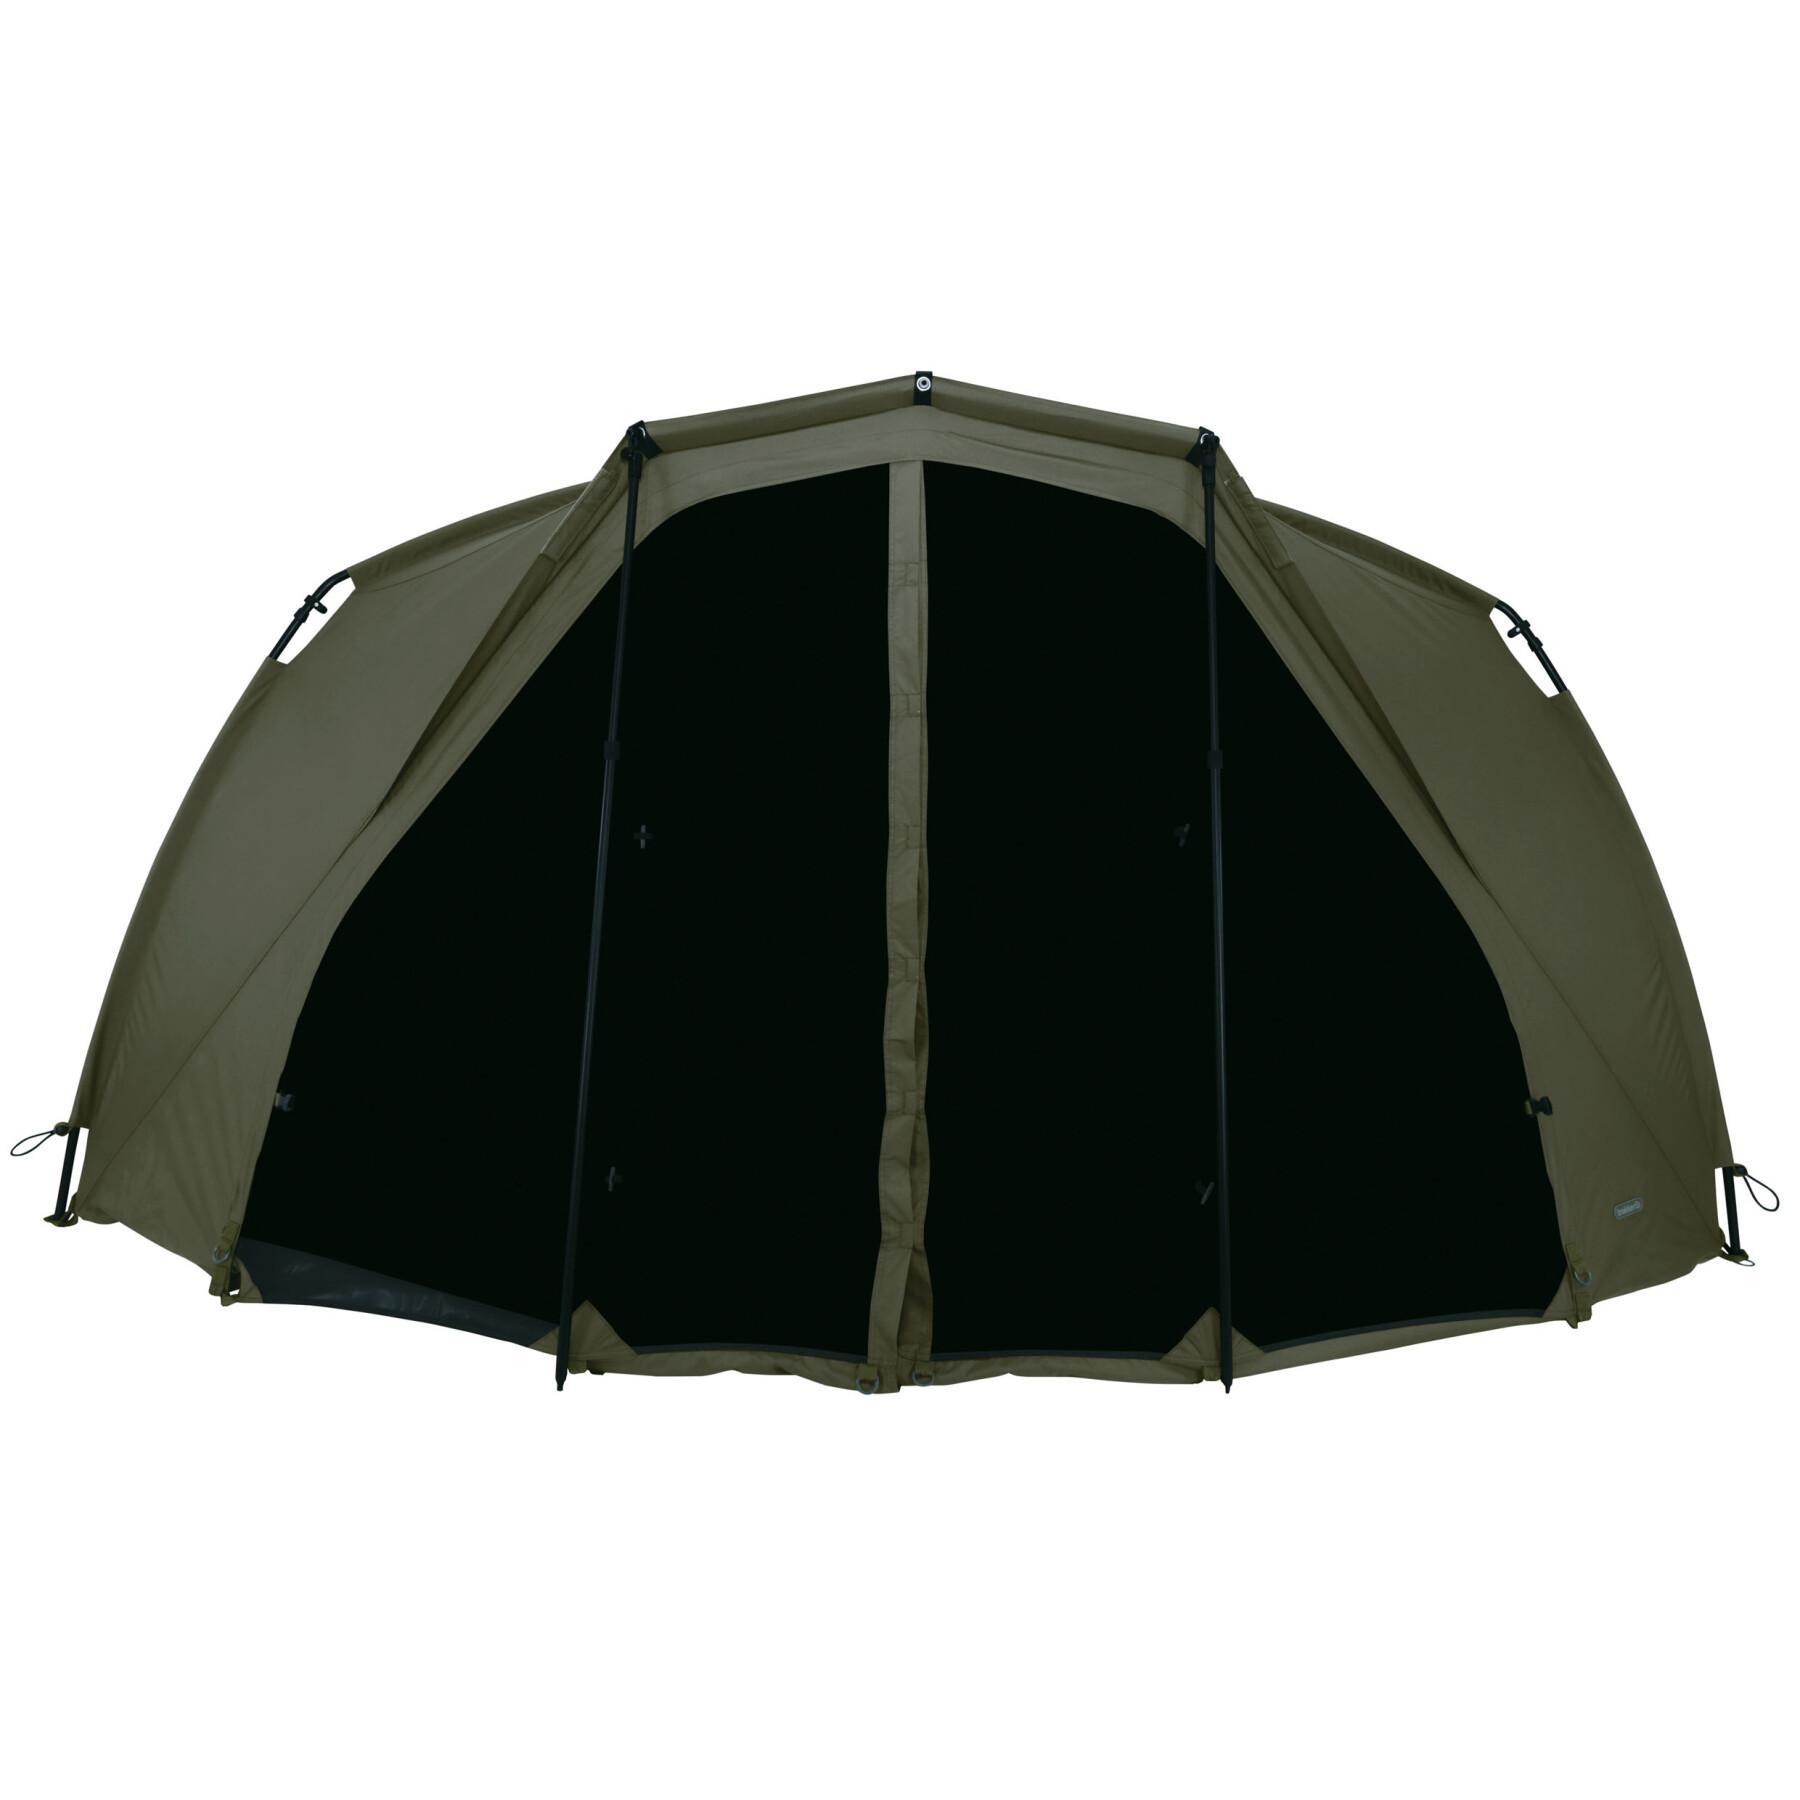 Mosquito net Trakker tempest advanced 100 insect panel